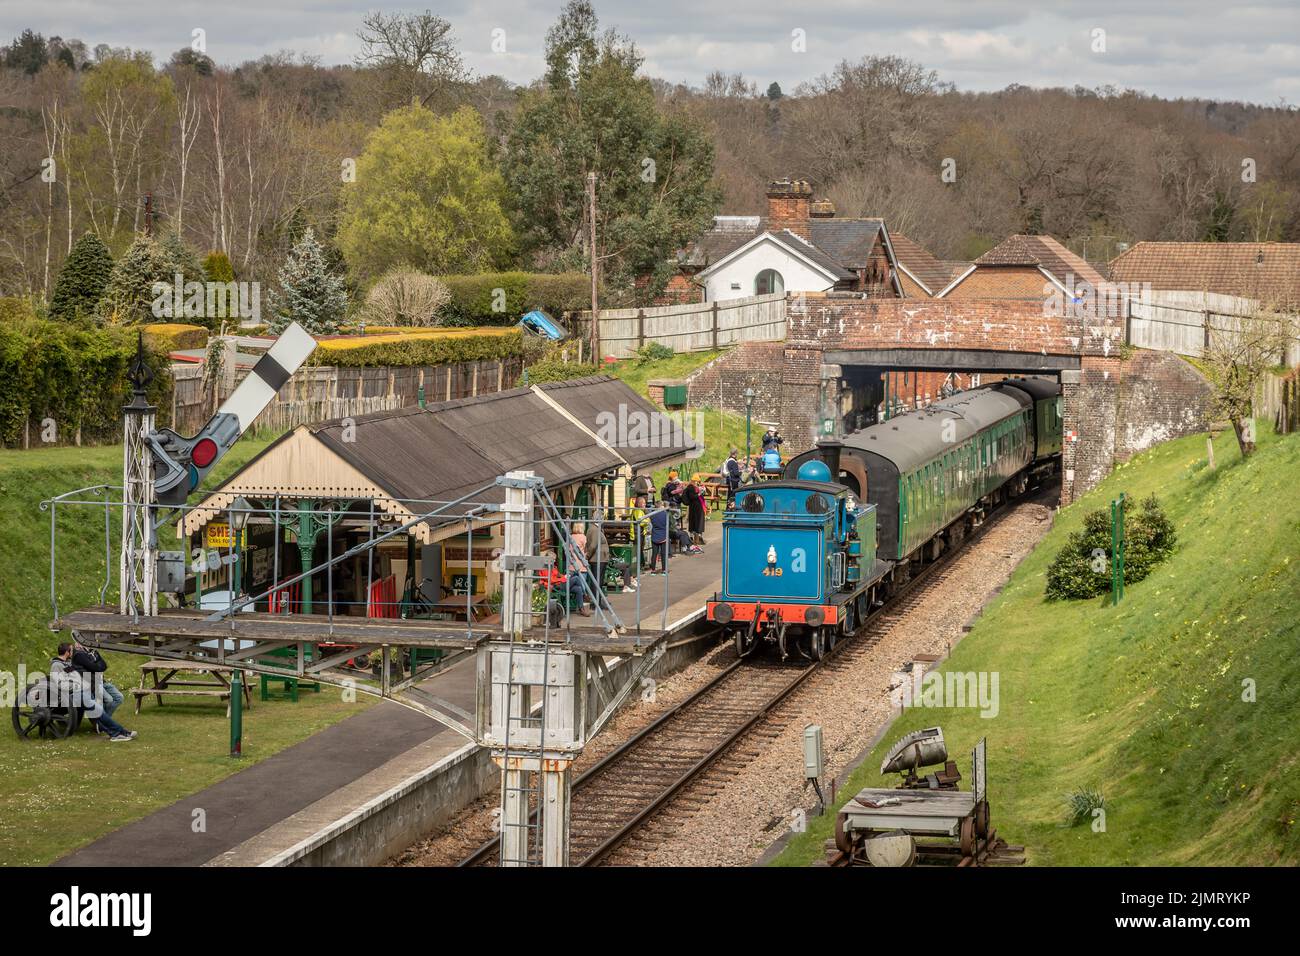 Caledonian Railway '439' class 0-4-4T No. 419 arrives at Groombridge station on the Spa Valley Railway Stock Photo